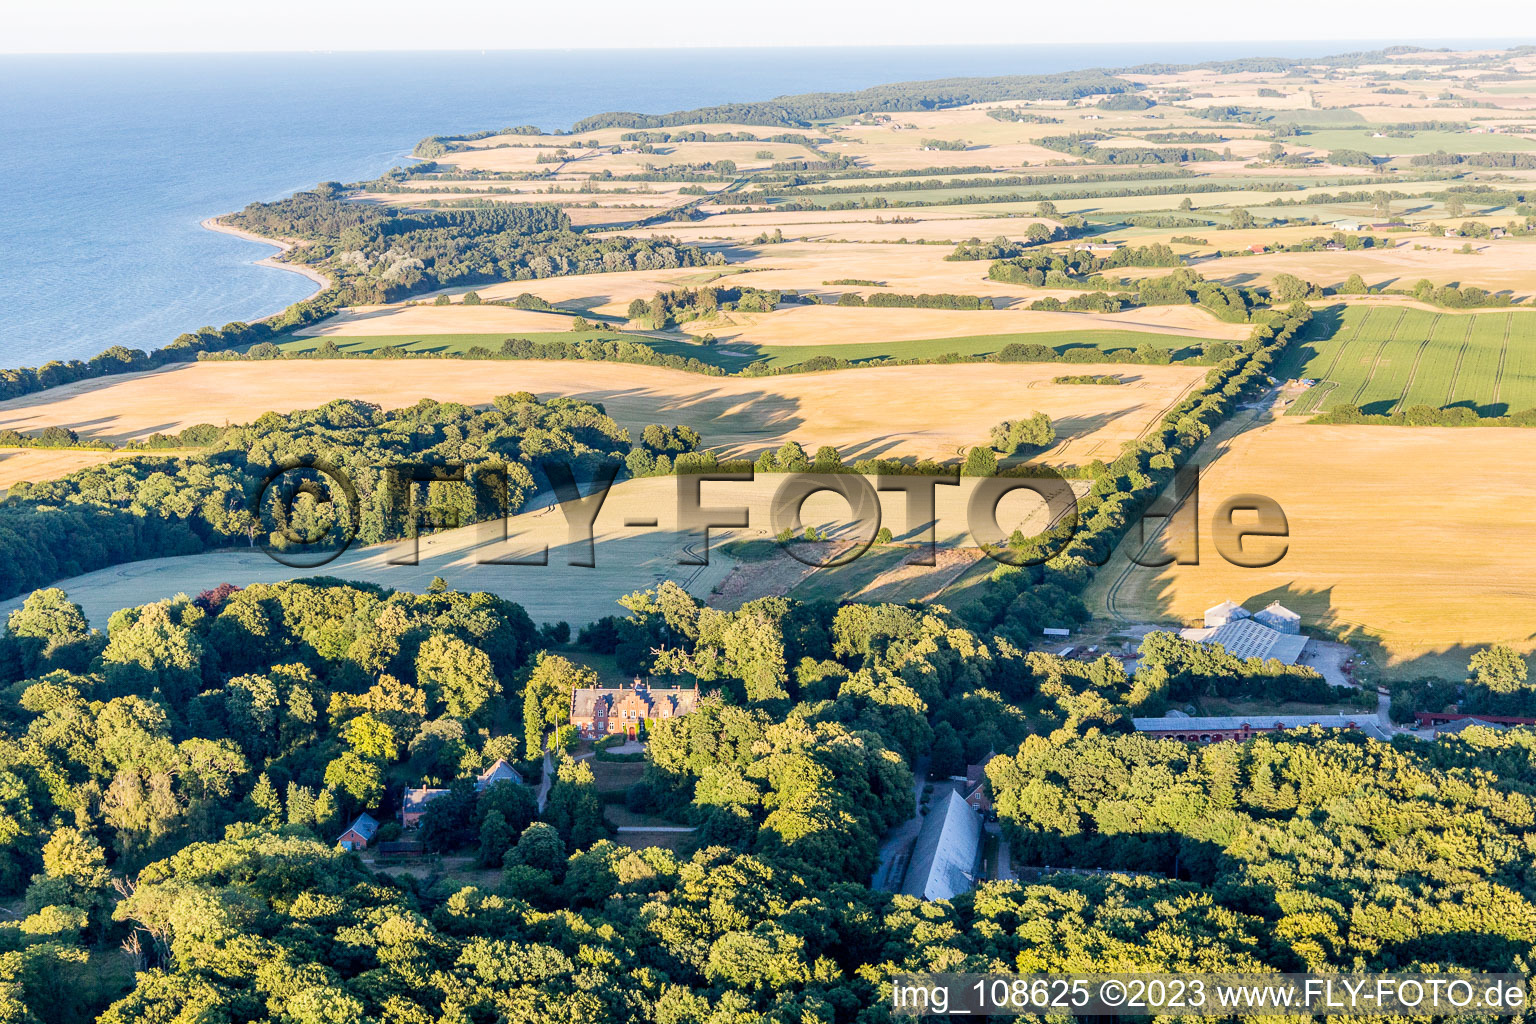 Drone image of Stege in the state Zealand, Denmark